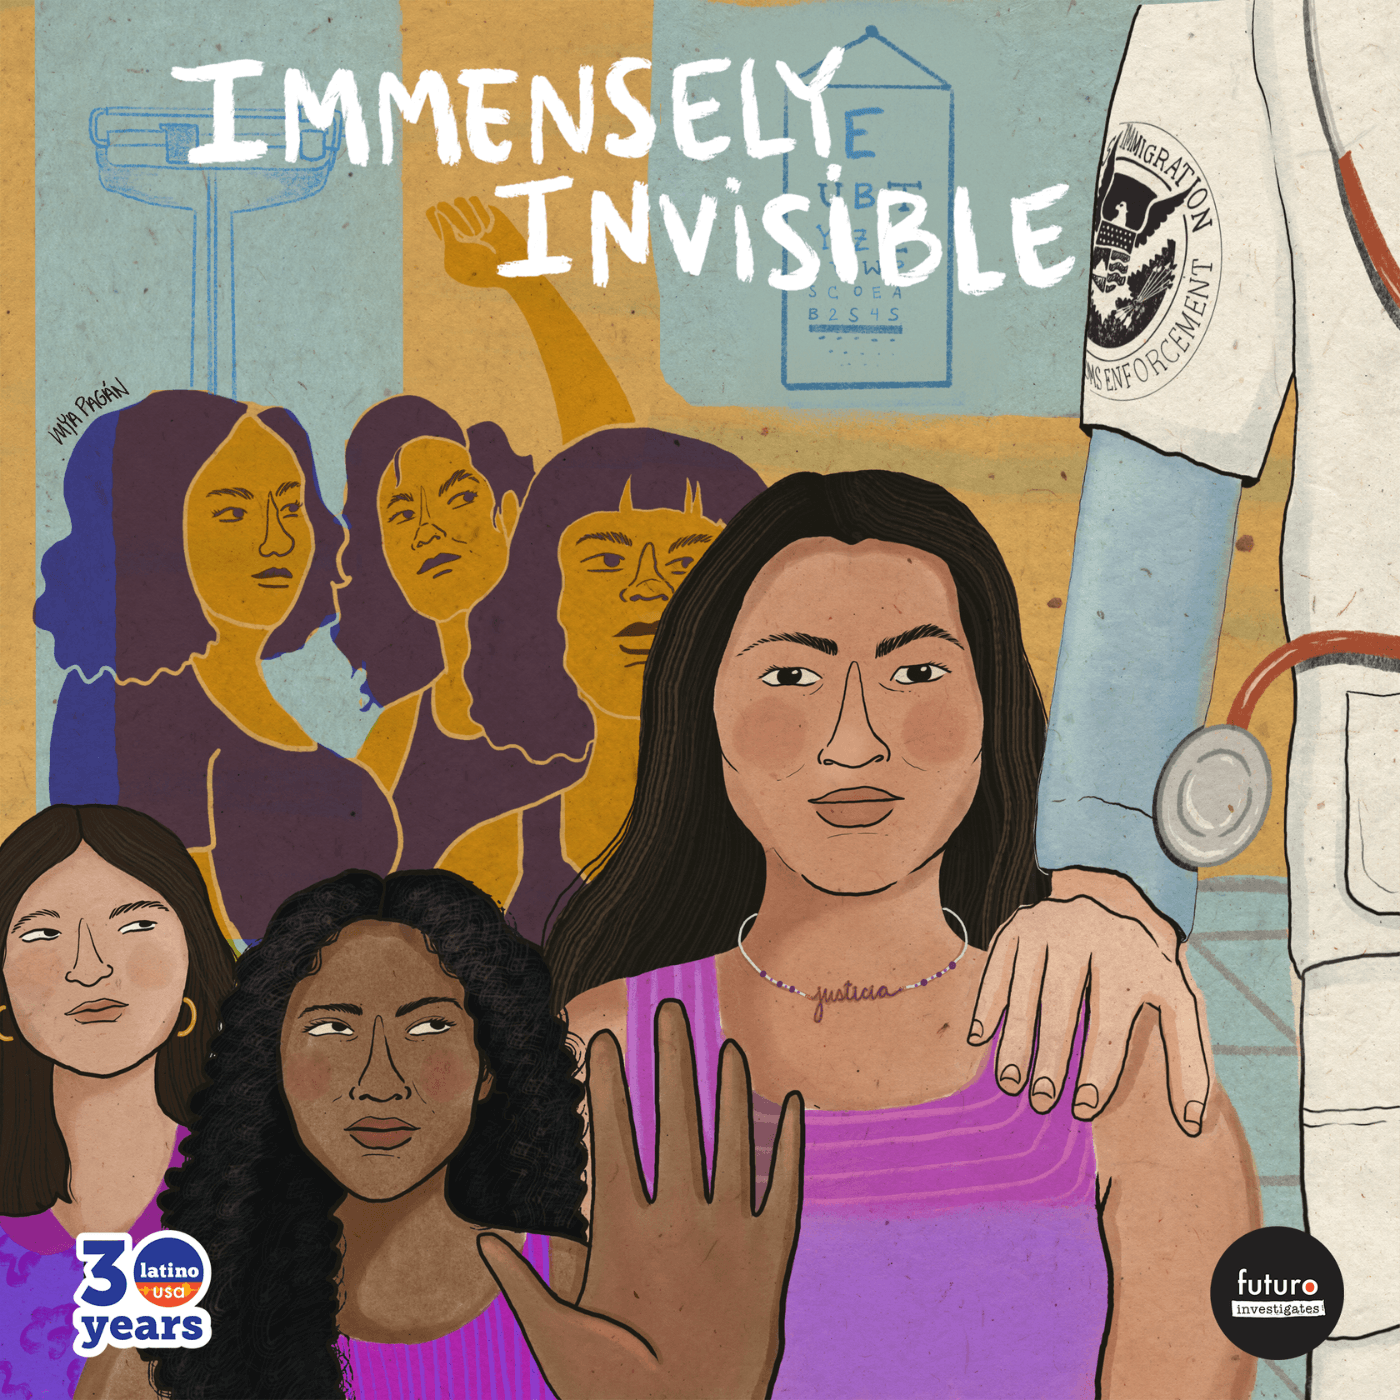 Thumbnail for "Immensely Invisible".